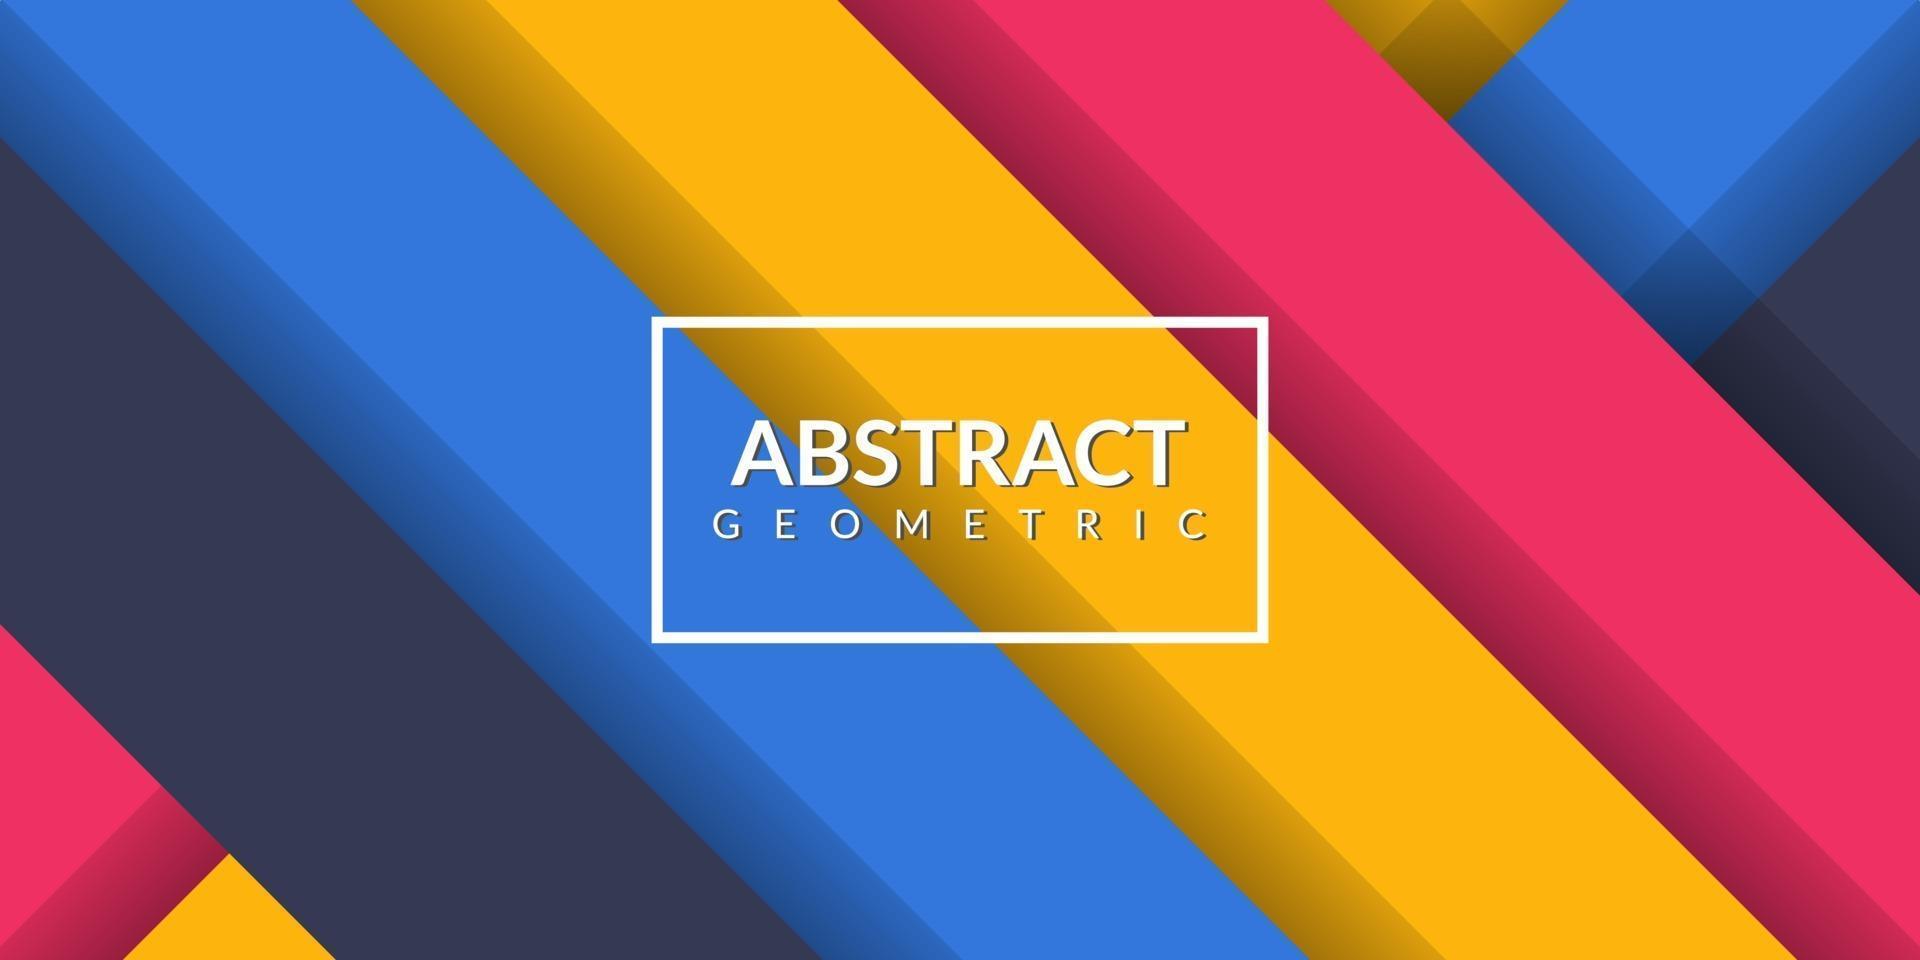 Modern abstract geometric rectangle colorful background vector